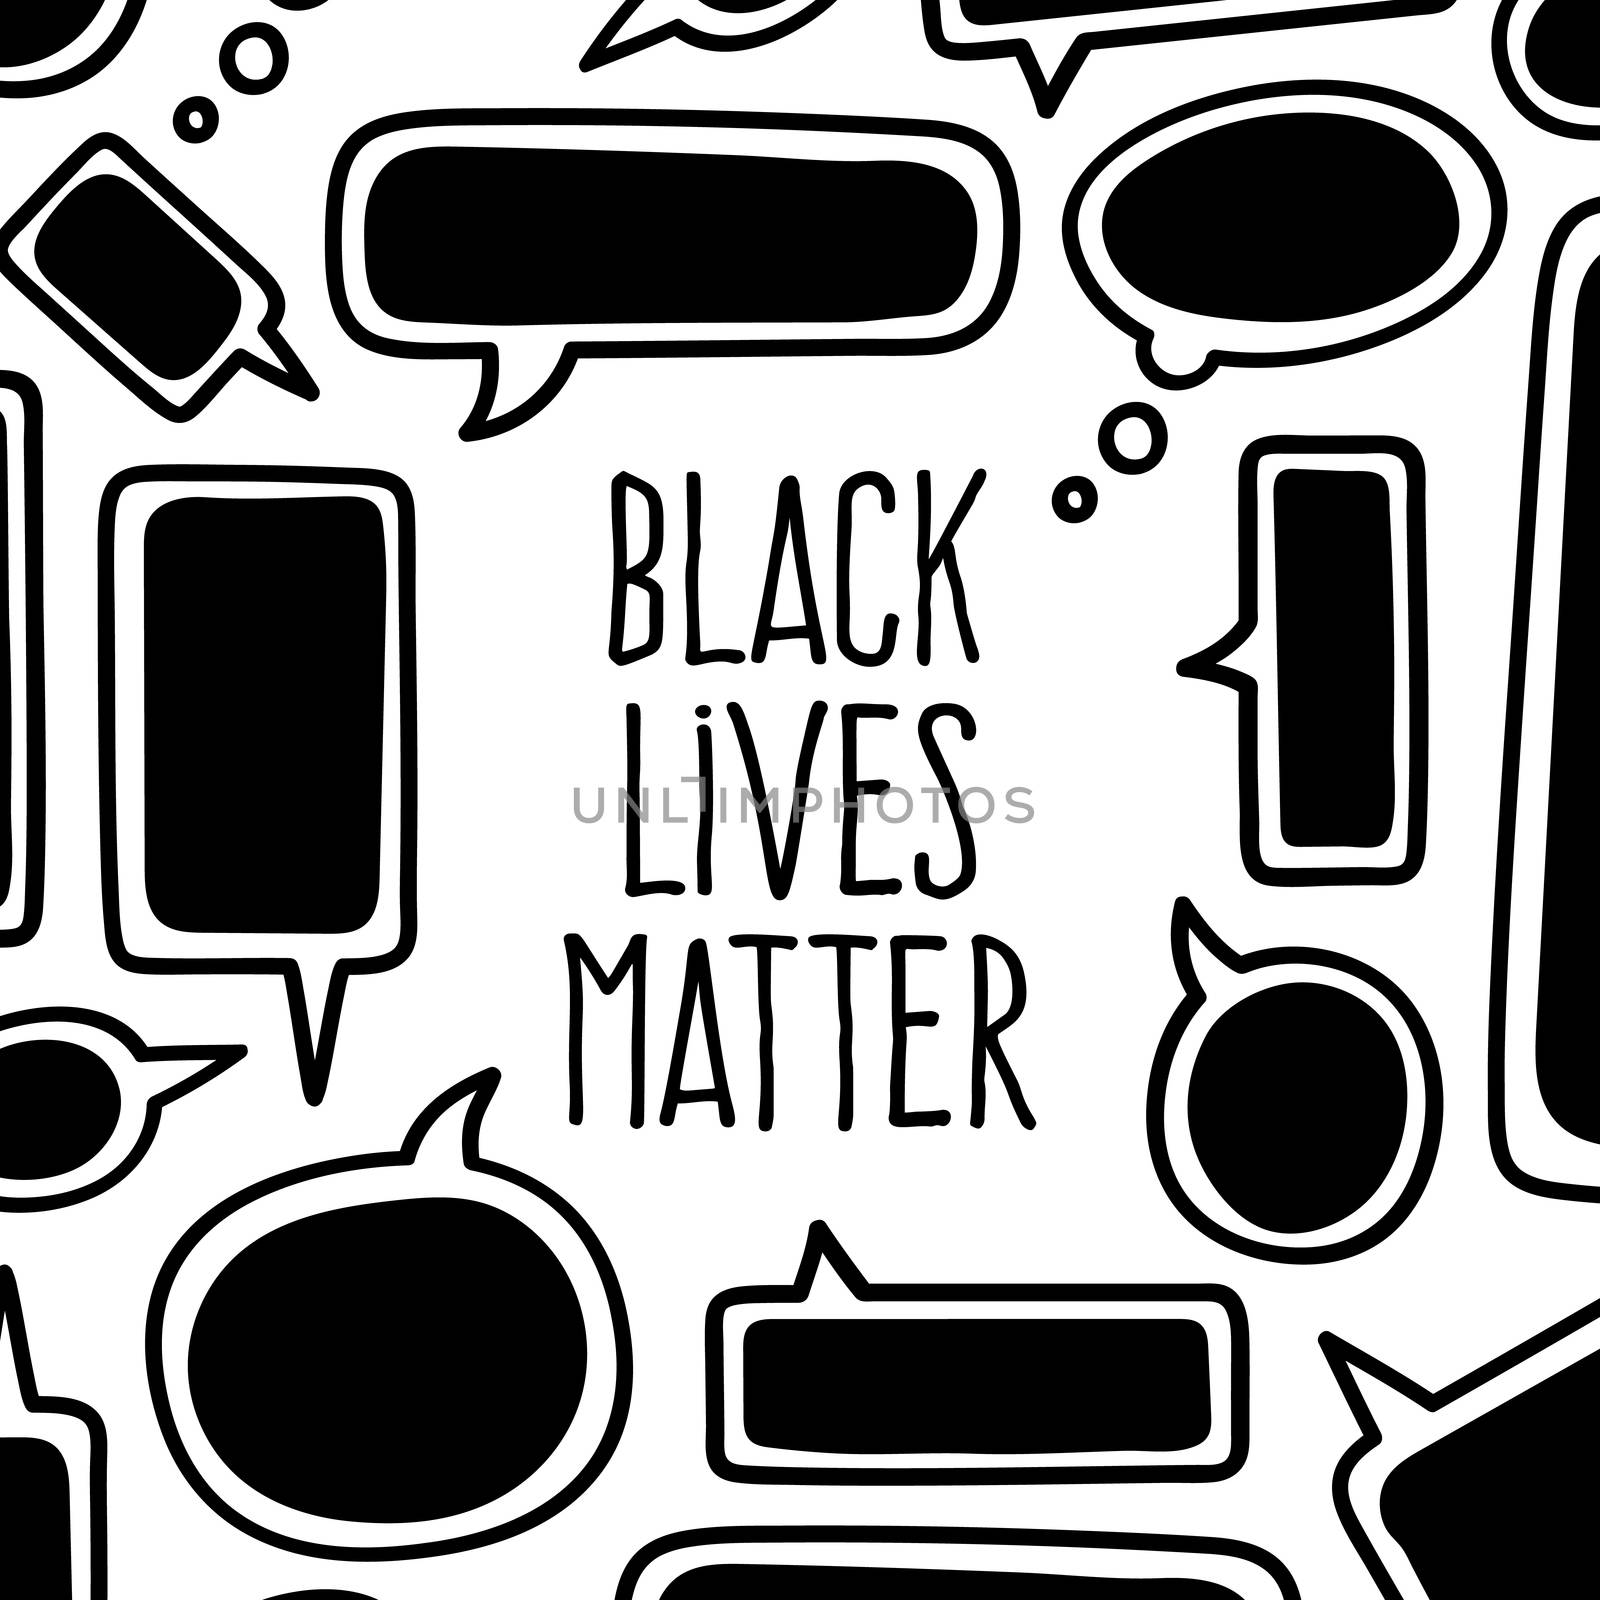 Black Lives Matter. Chat bubbles Protest Banner about Human Right of Black People in U.S. America. Vector Illustration. by lunarts